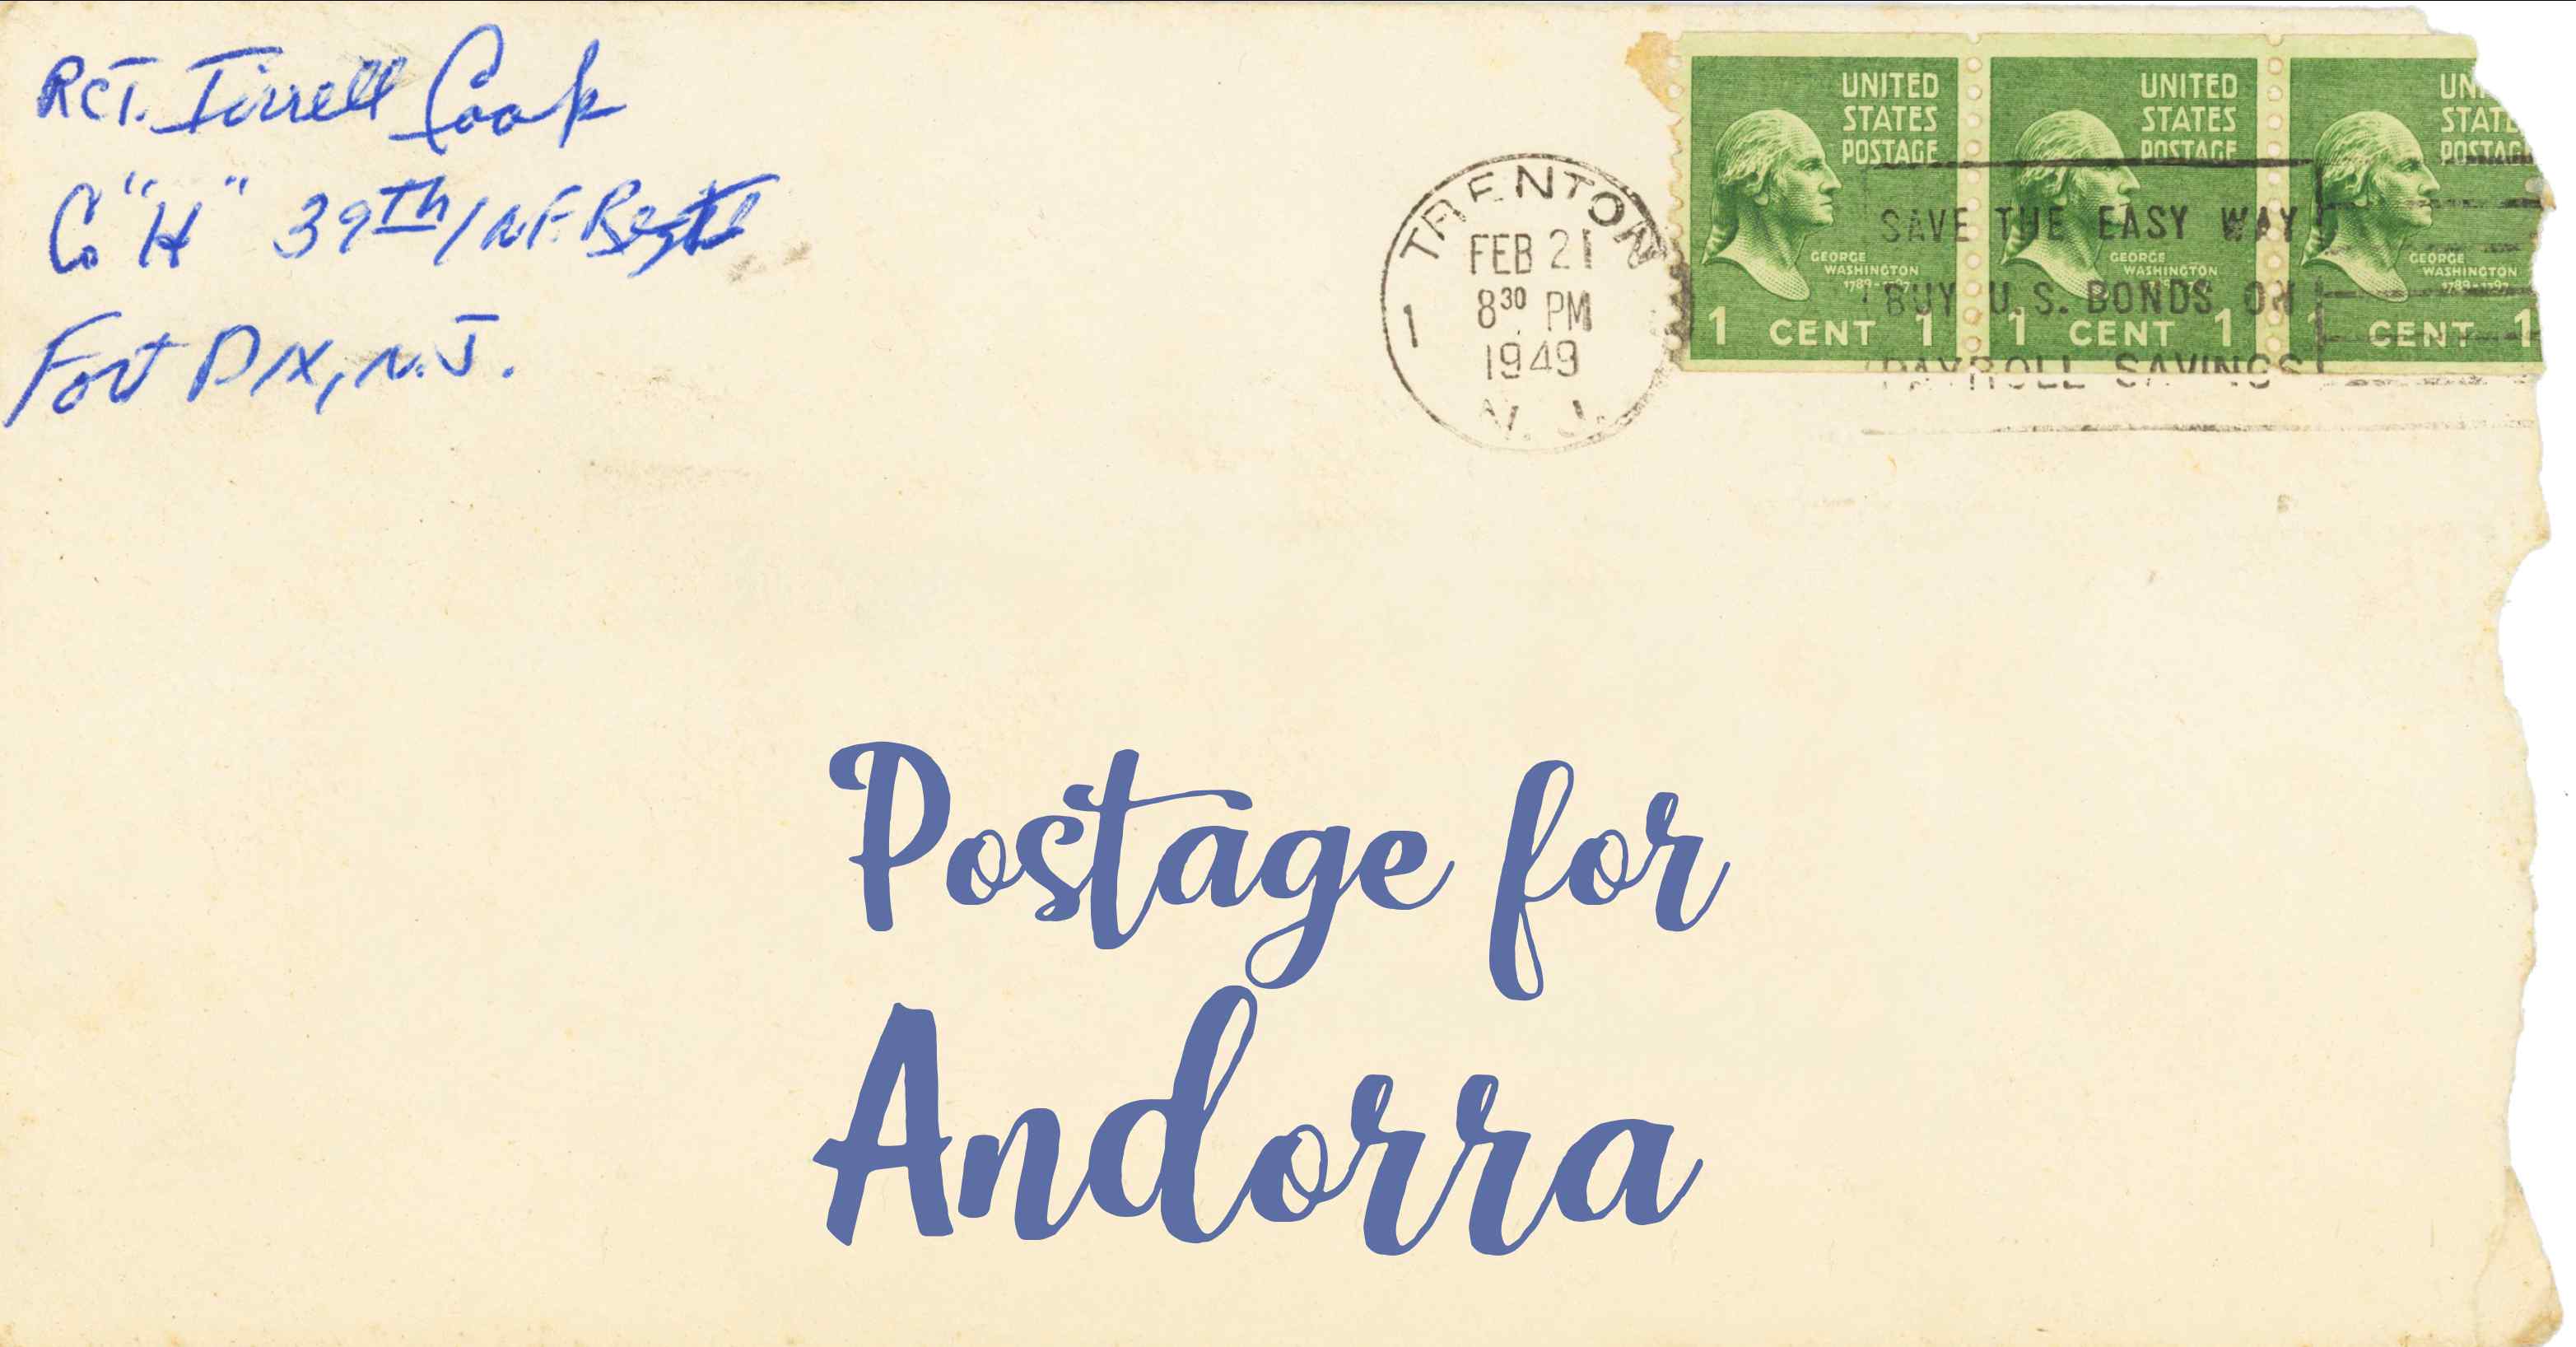 Photo of an old envelope reading 'Postage for Andorra'